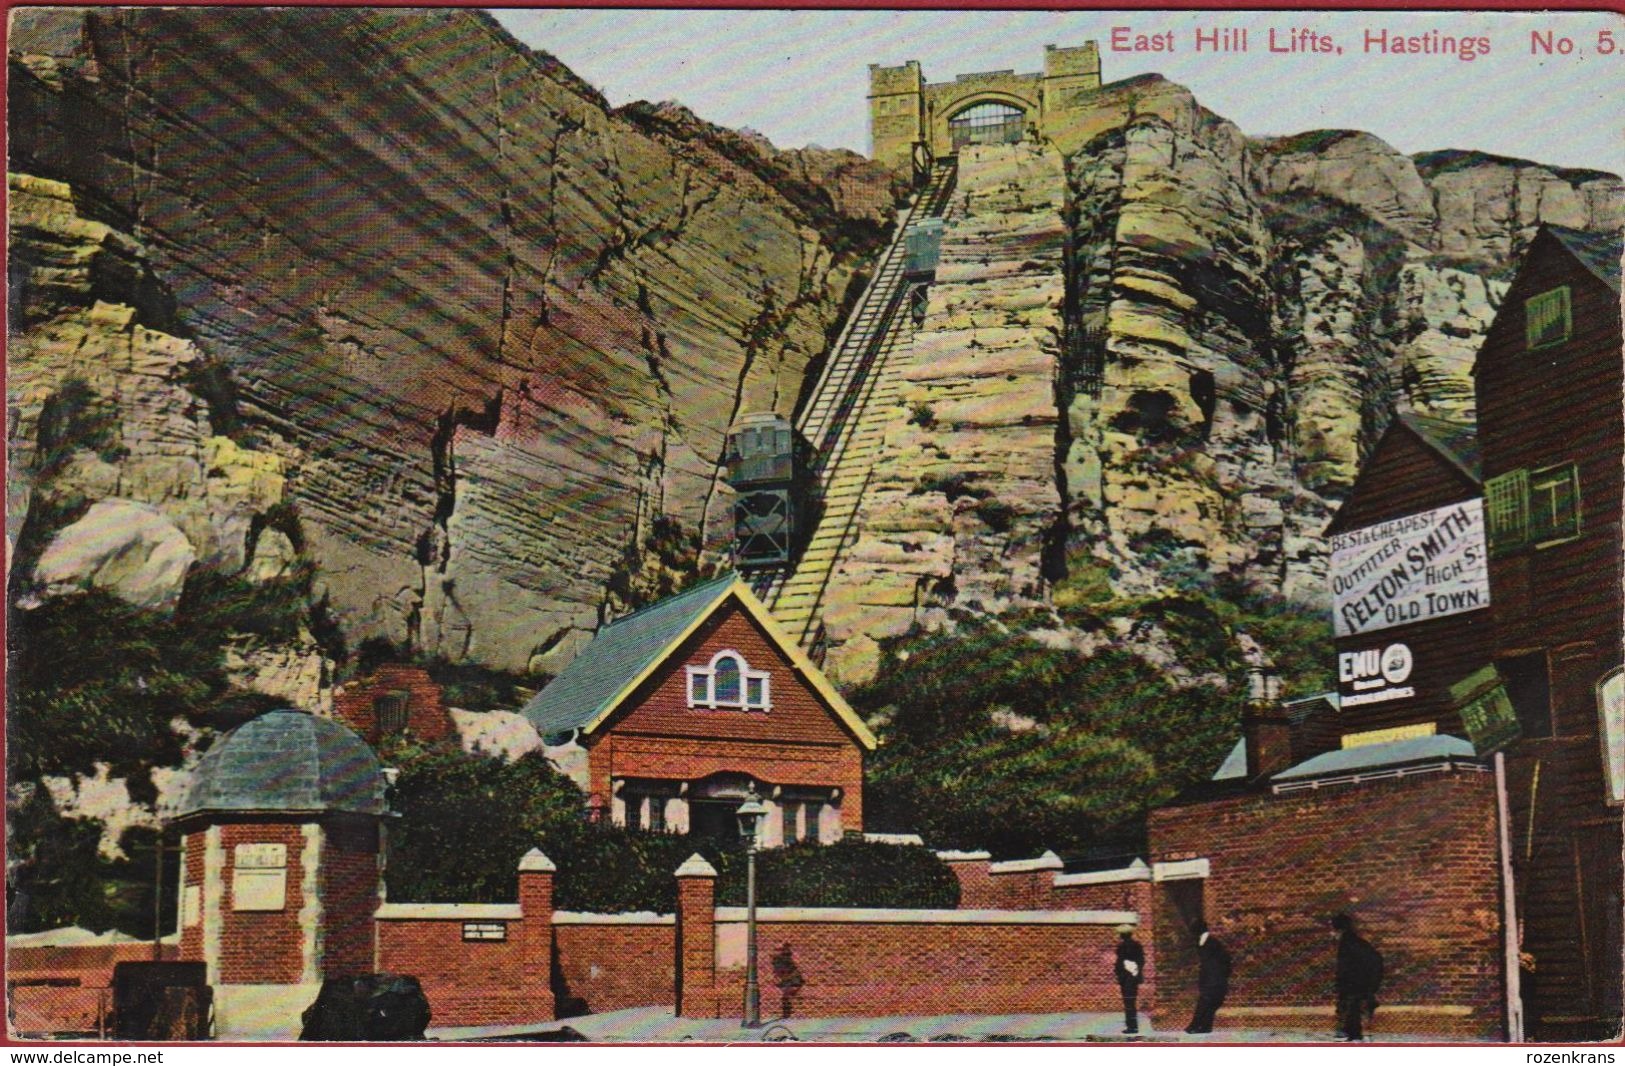 East Hill Lifts Hastings England United Kingdom RARE (In Good Condition) Felton Smith Publicity Wall - Hastings